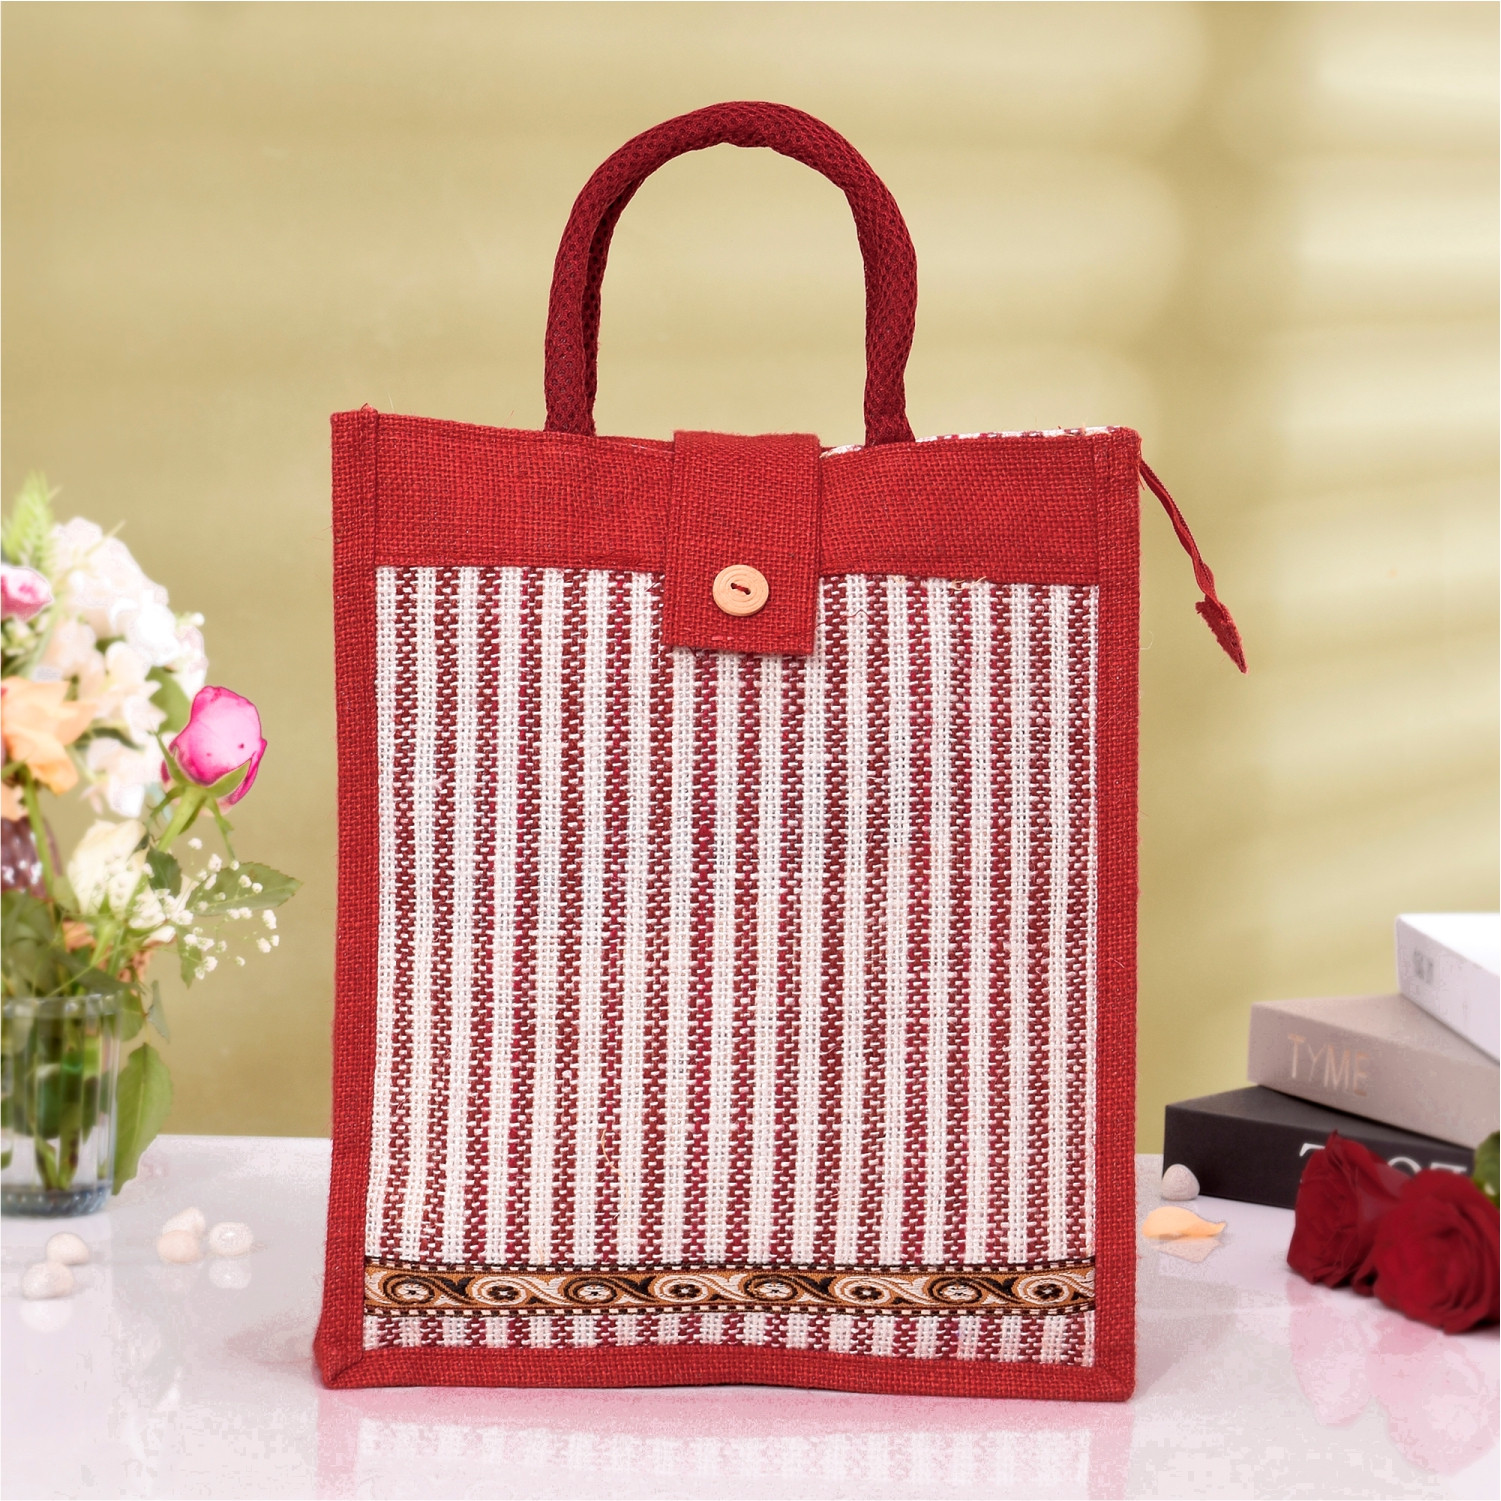 Kuber Industries Shopping Bag | Jute Carry Bag | Zipper Grocery Bag with Handle | Vegetable Bag with Top Flap | Reusable Shopping Bag | Lining-Grocery Bag | Medium | Red